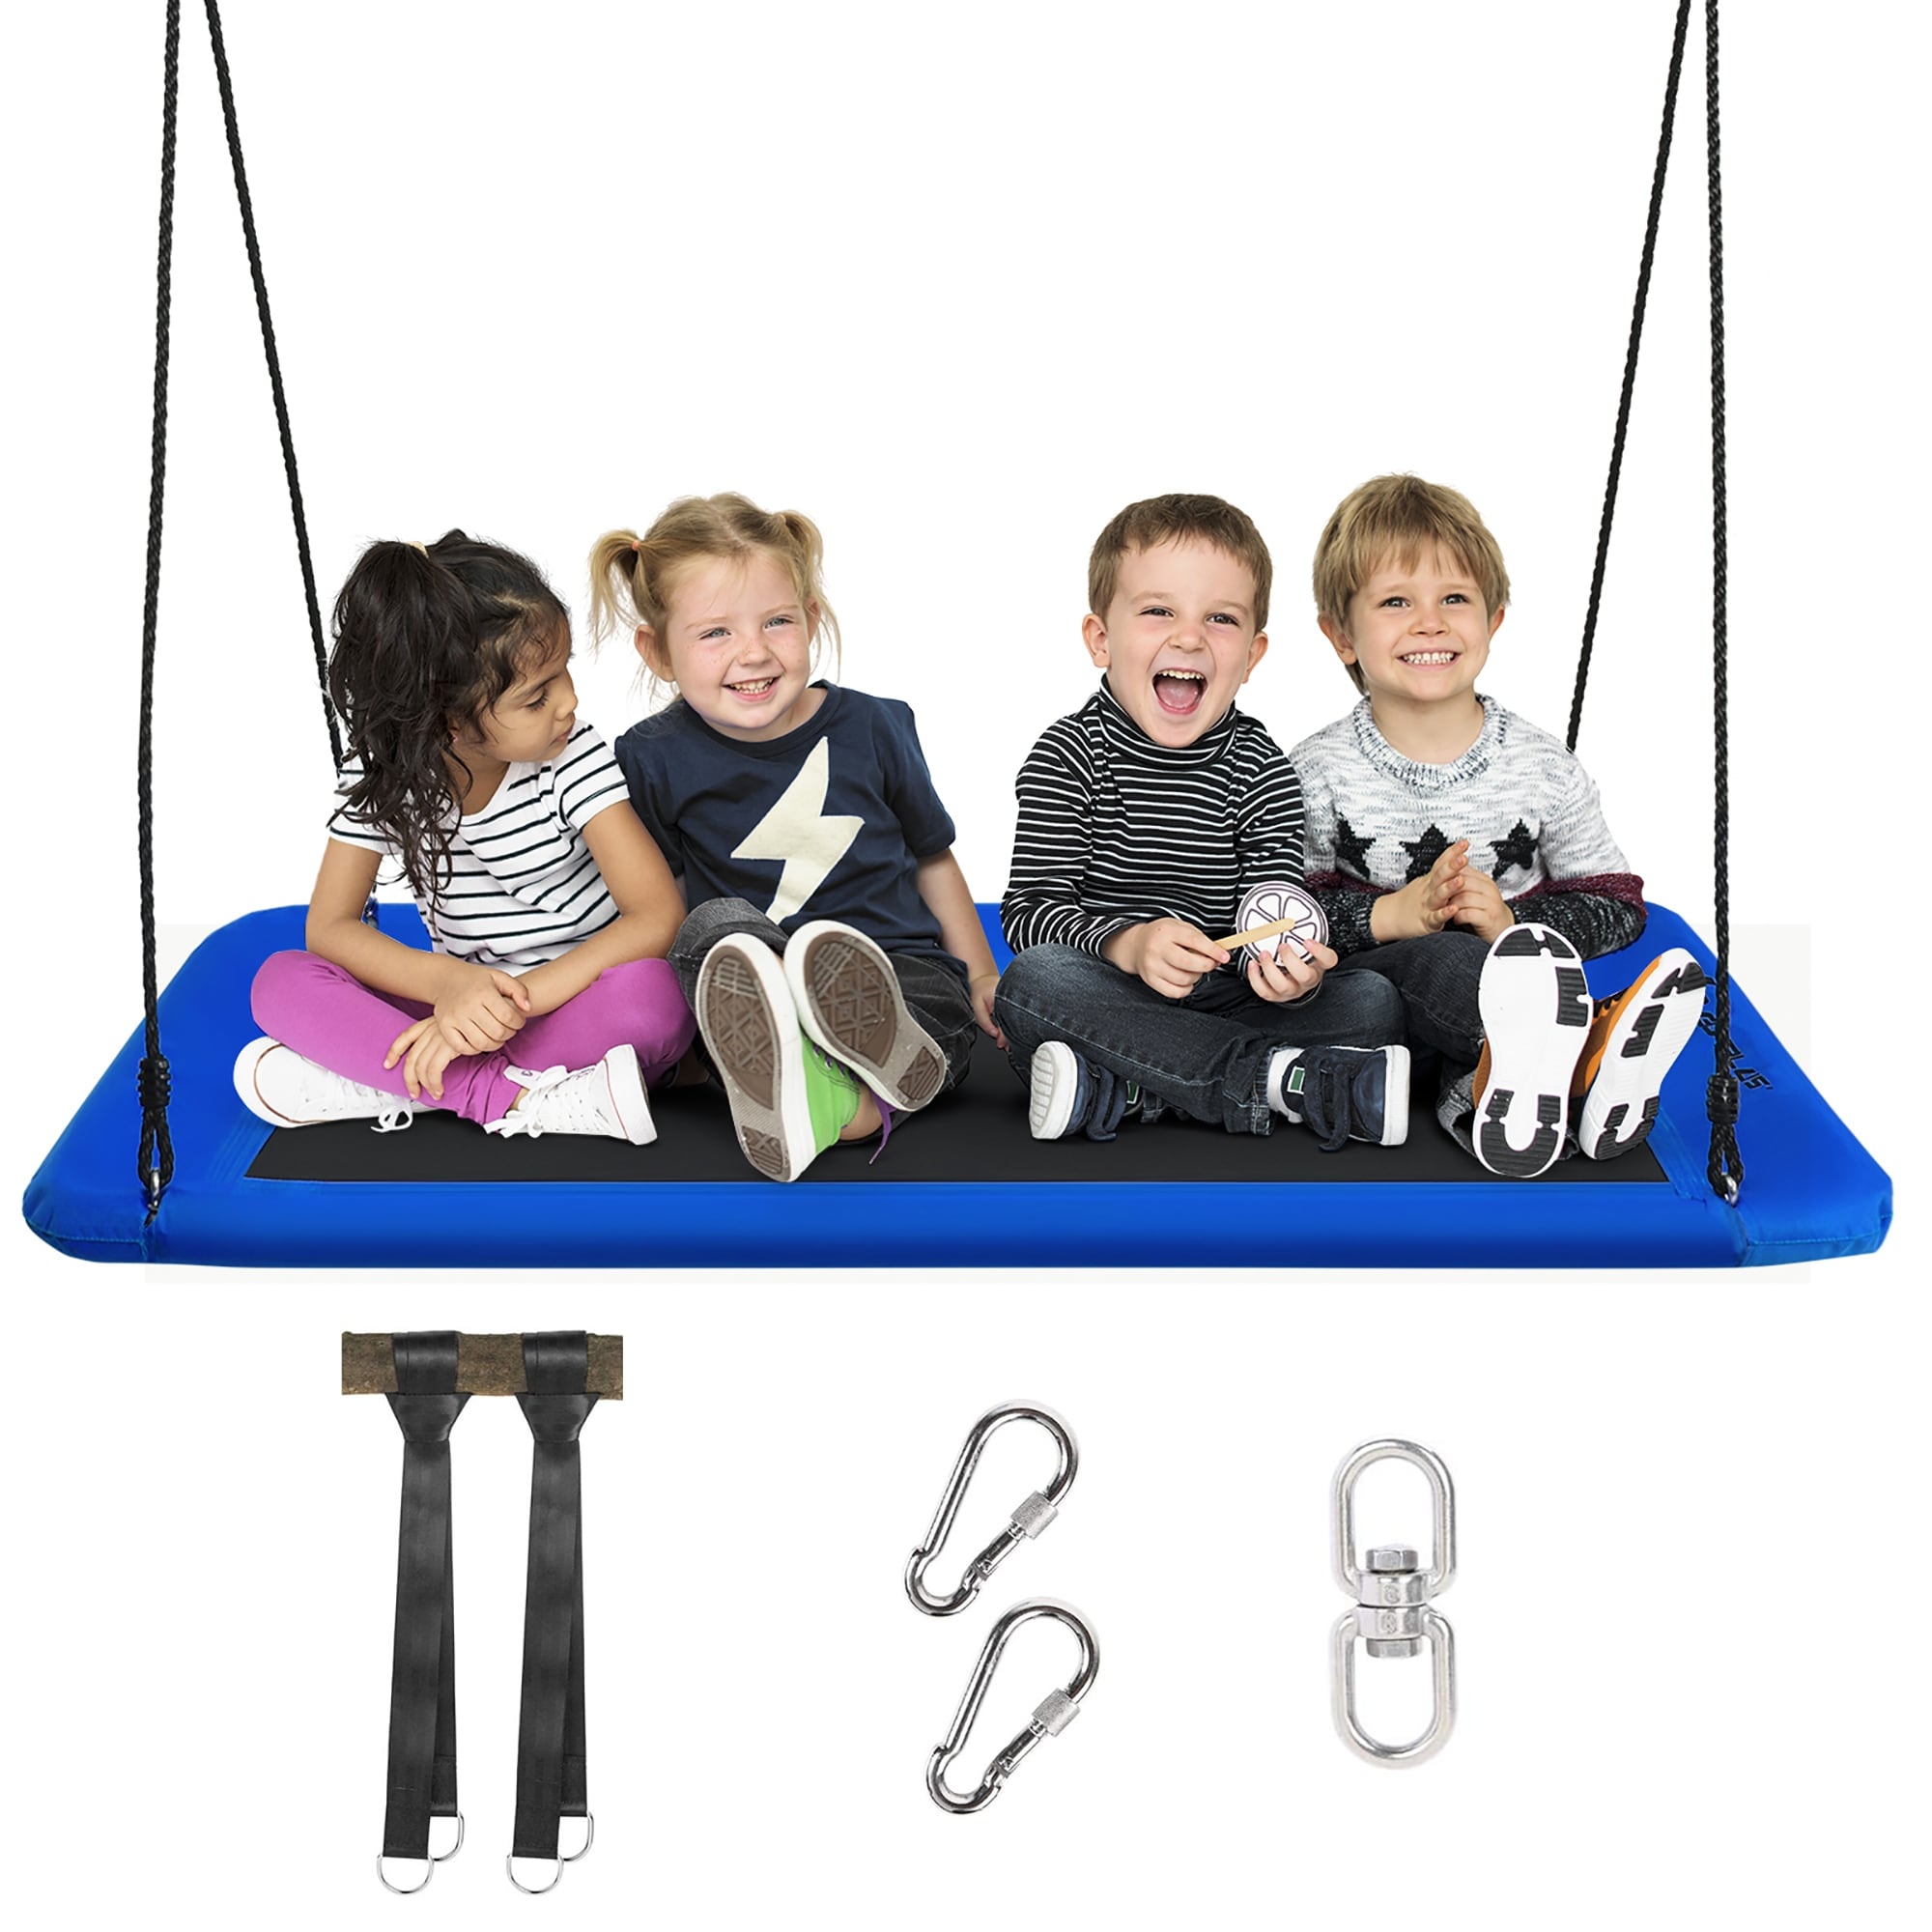 60" Giant Large Tree Swing Outdoor Hanging Play Toy PE Rope EZ Setup 700LBs